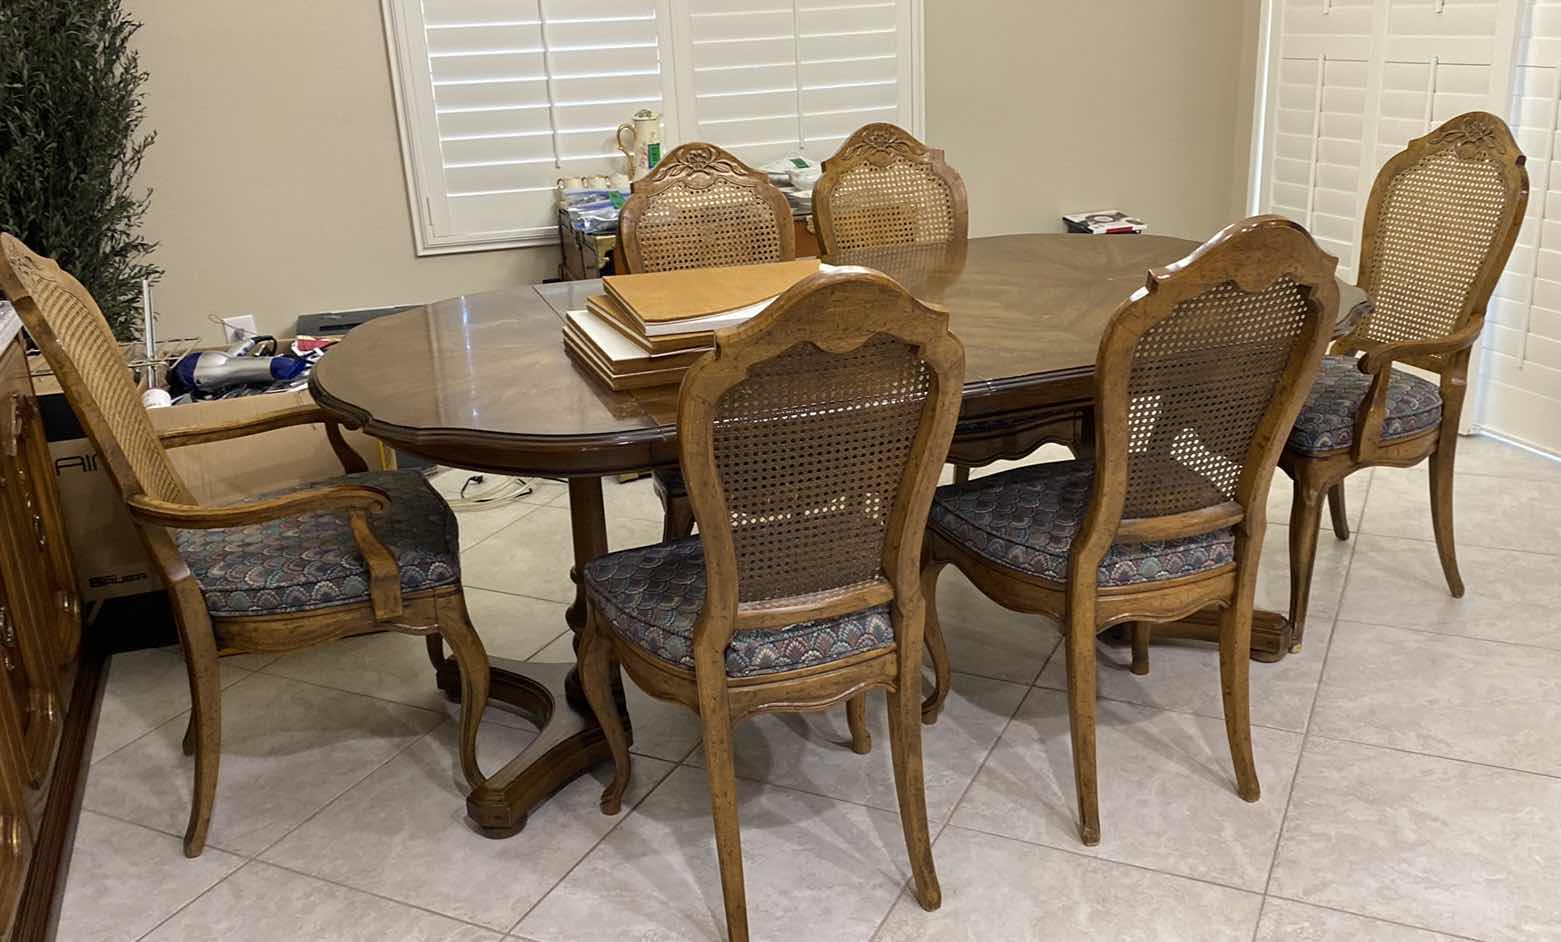 Photo 1 of WOOD DINING TABLE WITH 6 CAN BACK CHAIRS 35” X 42” H29.5” AND 2 LEAFS 20” EACH. TABLE PADS INCLUDED - NEEDS REFINISHING